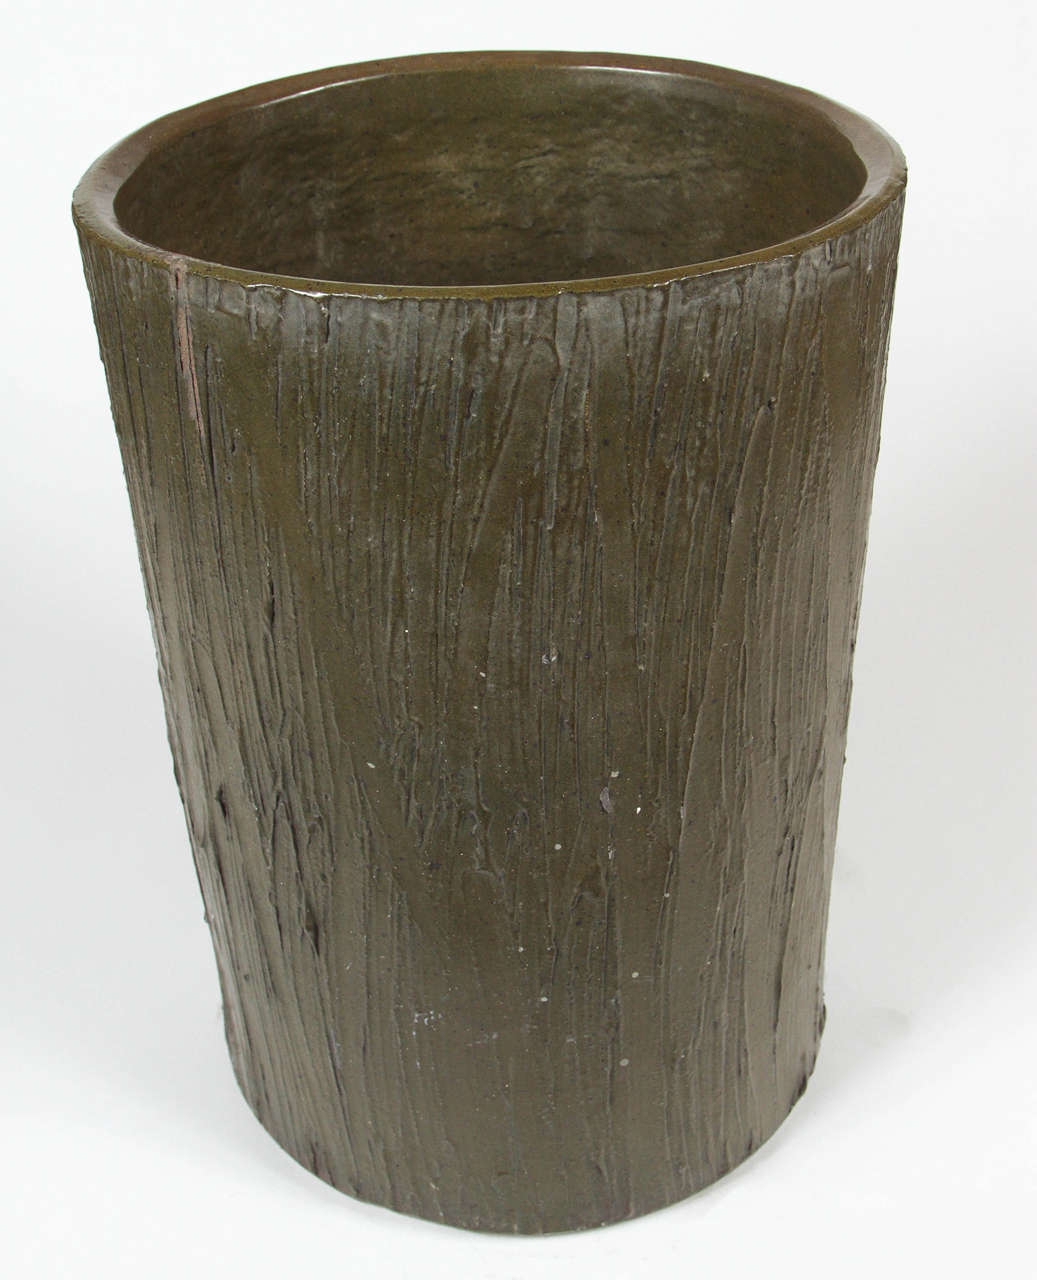 Late 20th Century David Cressey for AP # 4030 Olive Glazed Planter with Linear Texture